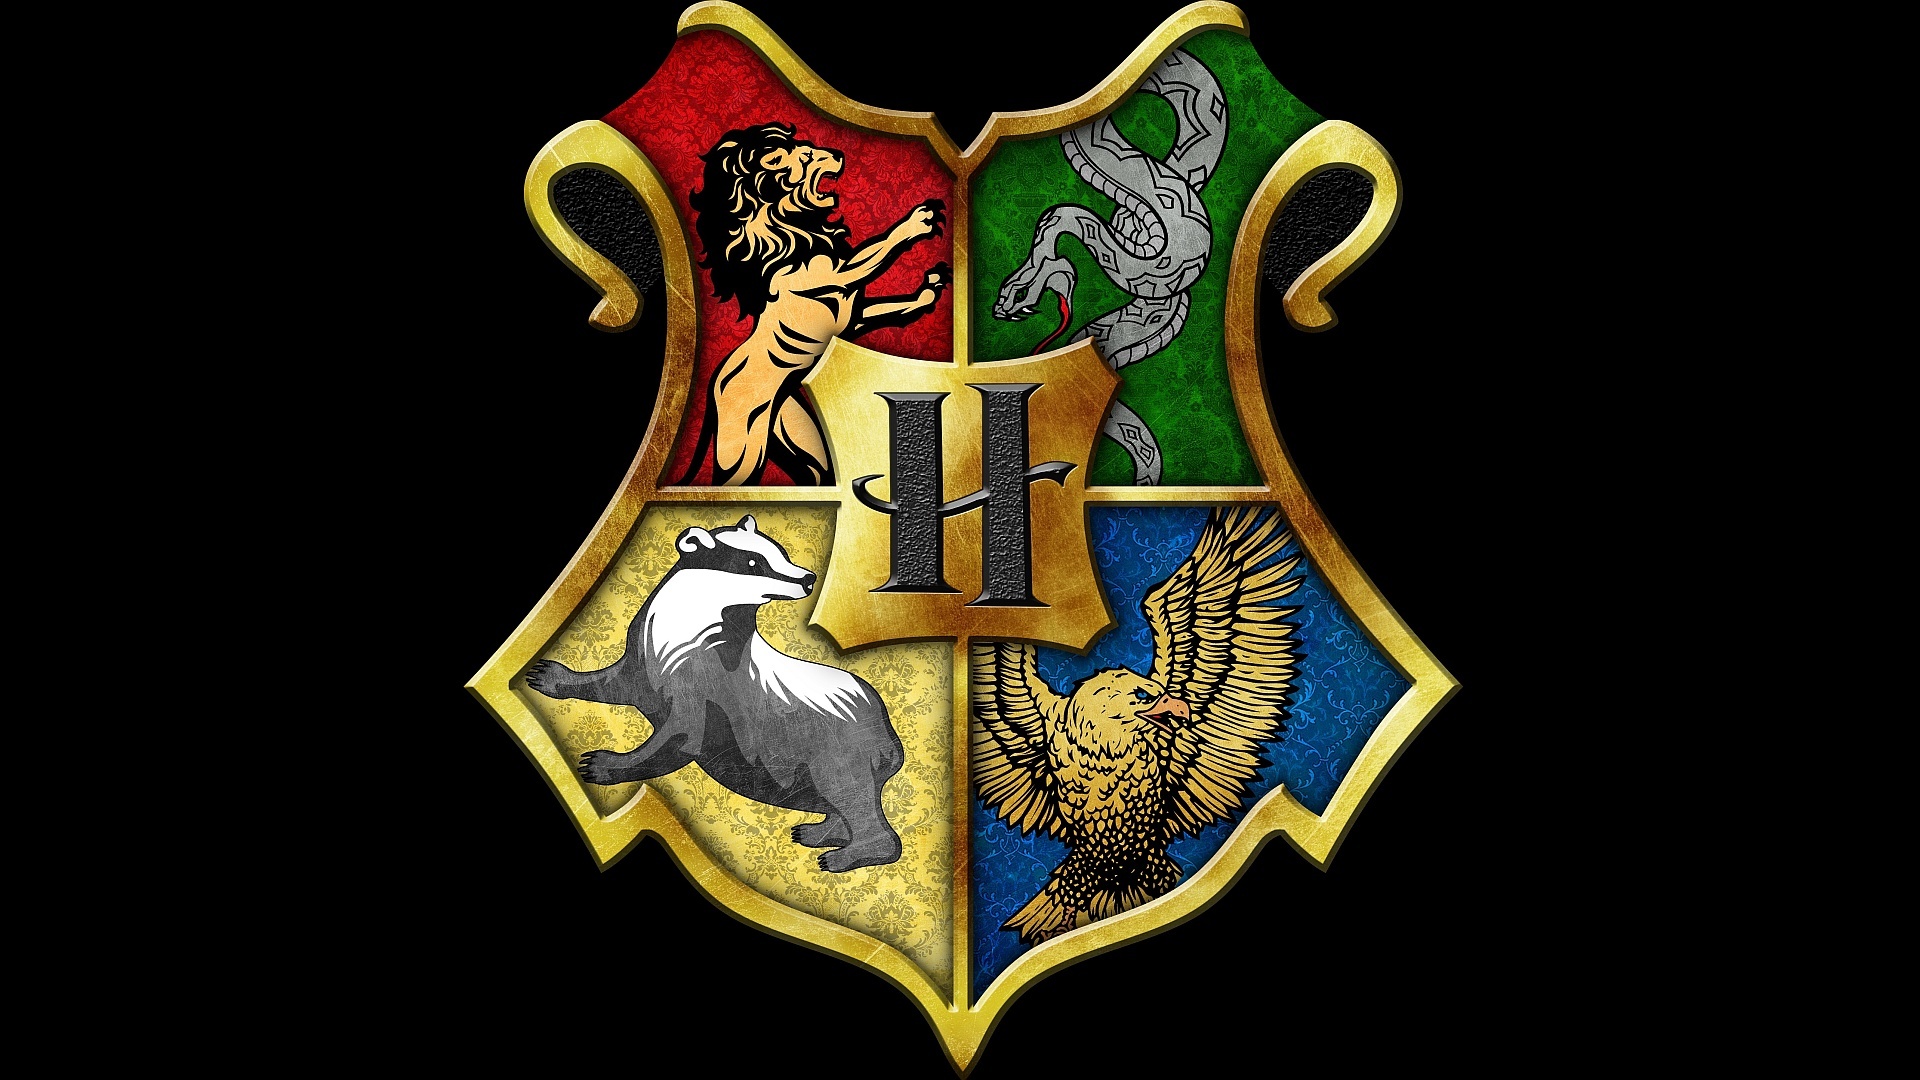 Hogwarts Crest (Movies) | Harry Potter and the Philosopher's Stone, Fantasy movie wallpaper, Magical world, 1920x1080 Full HD Desktop